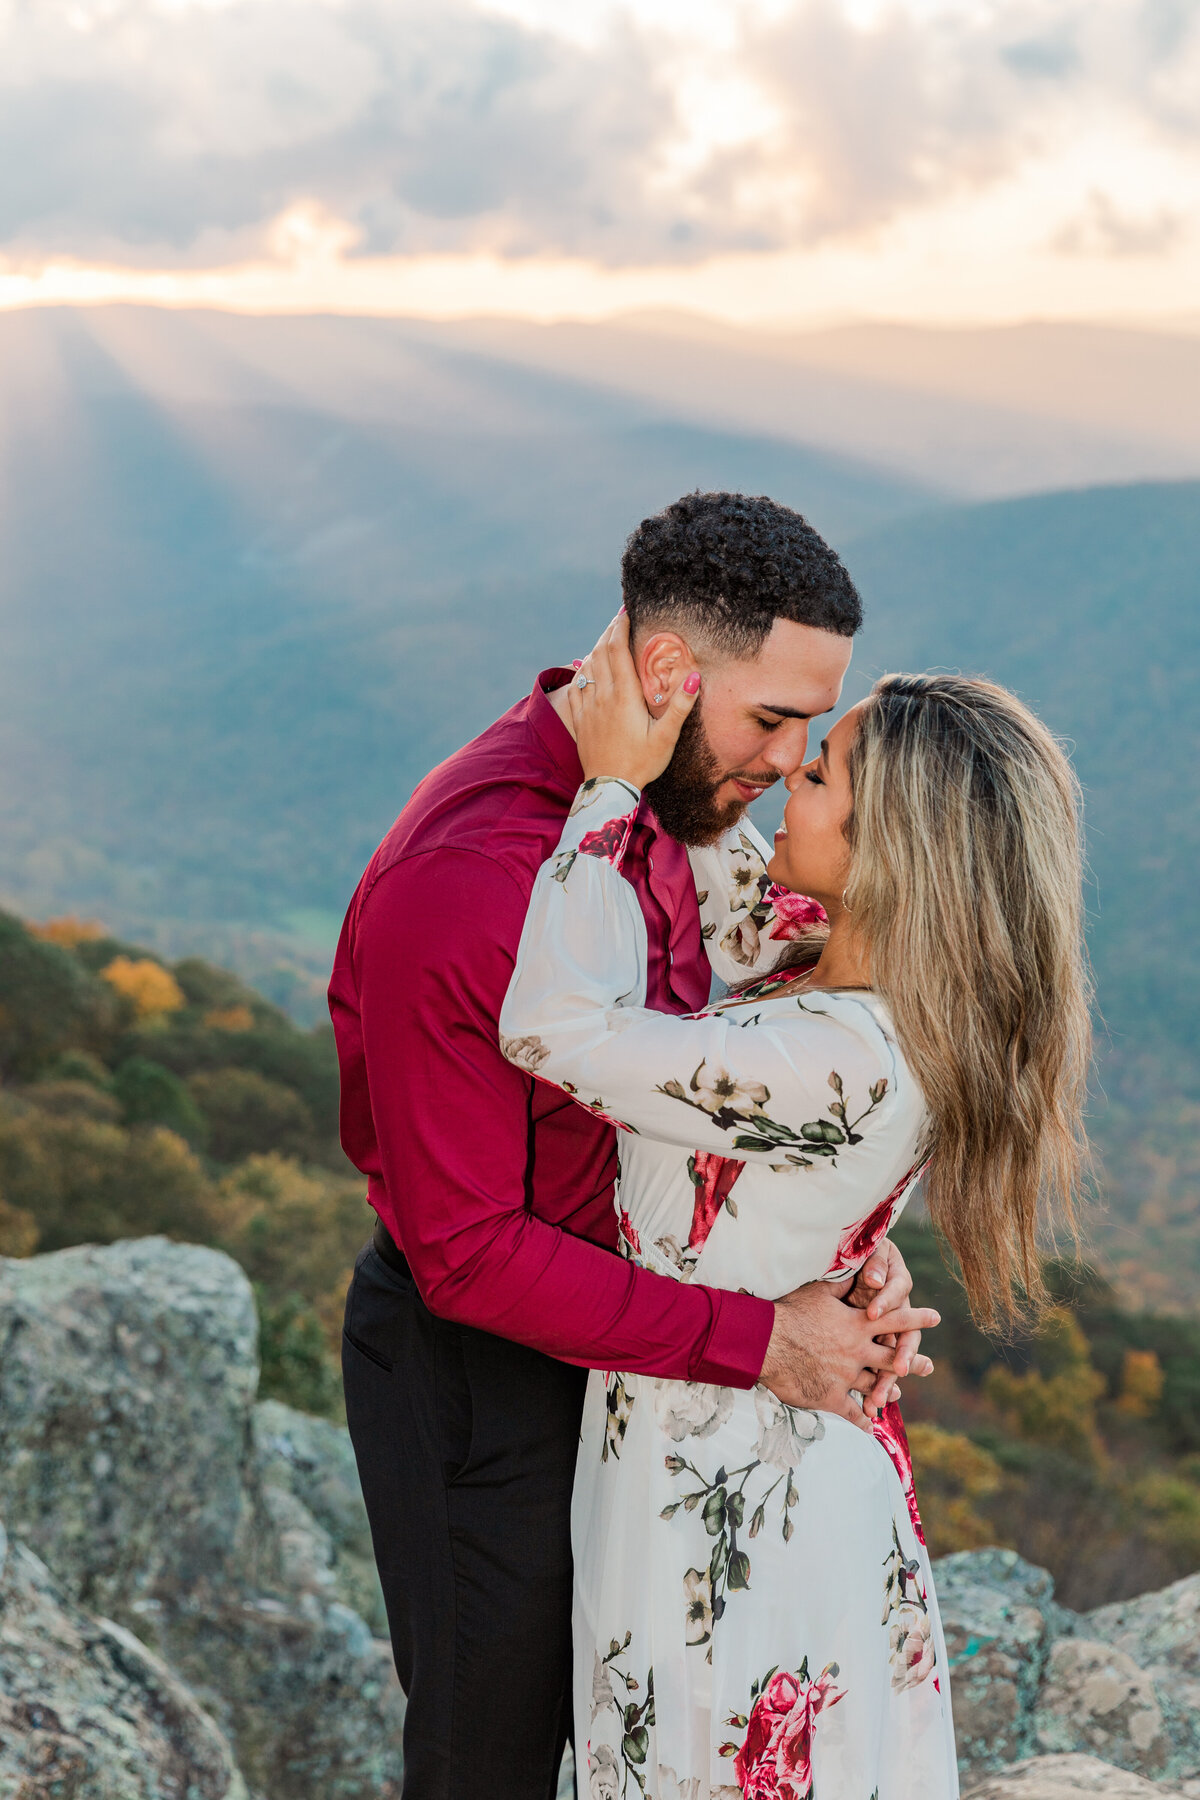 Lexie & Andre - Ravens Roost Engagement Session-0268